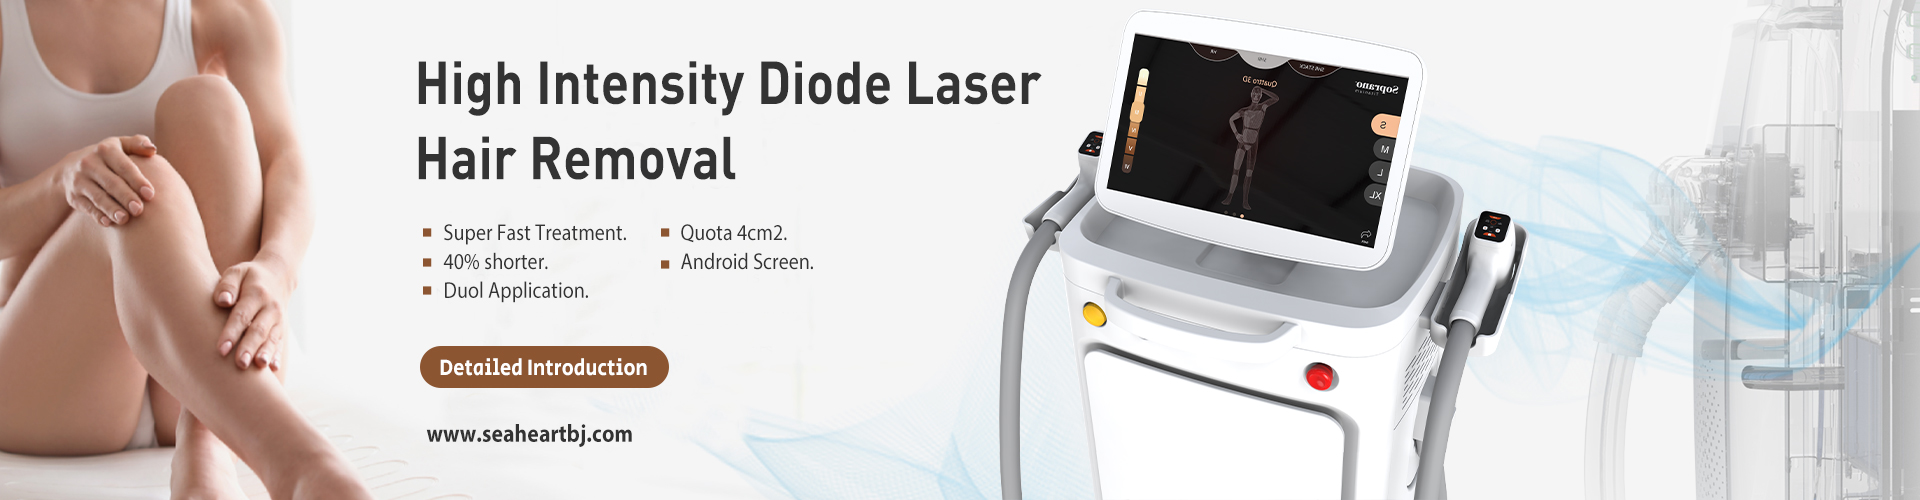 Laser devices for professional use